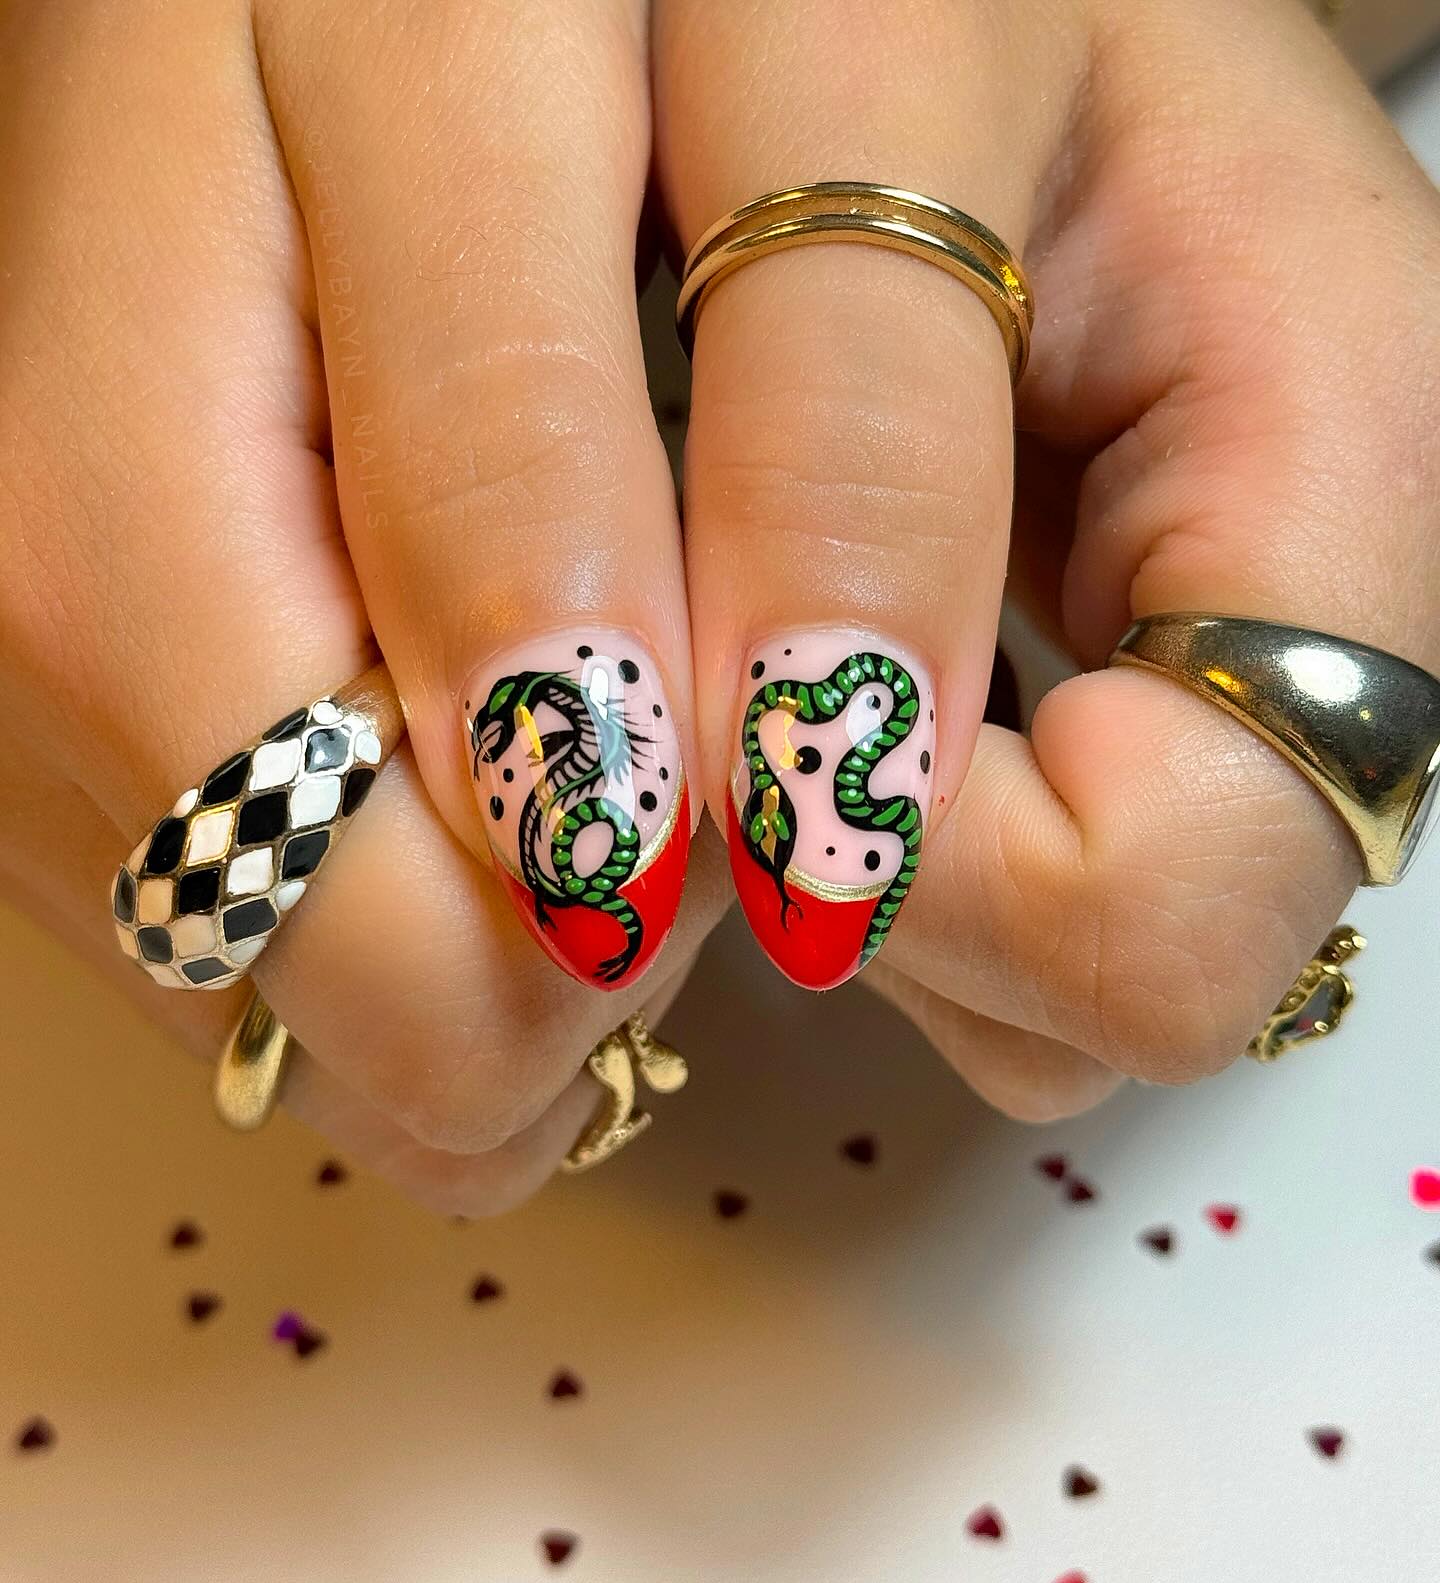 100+ Short Nail Designs You’ll Want To Try This Year images 68